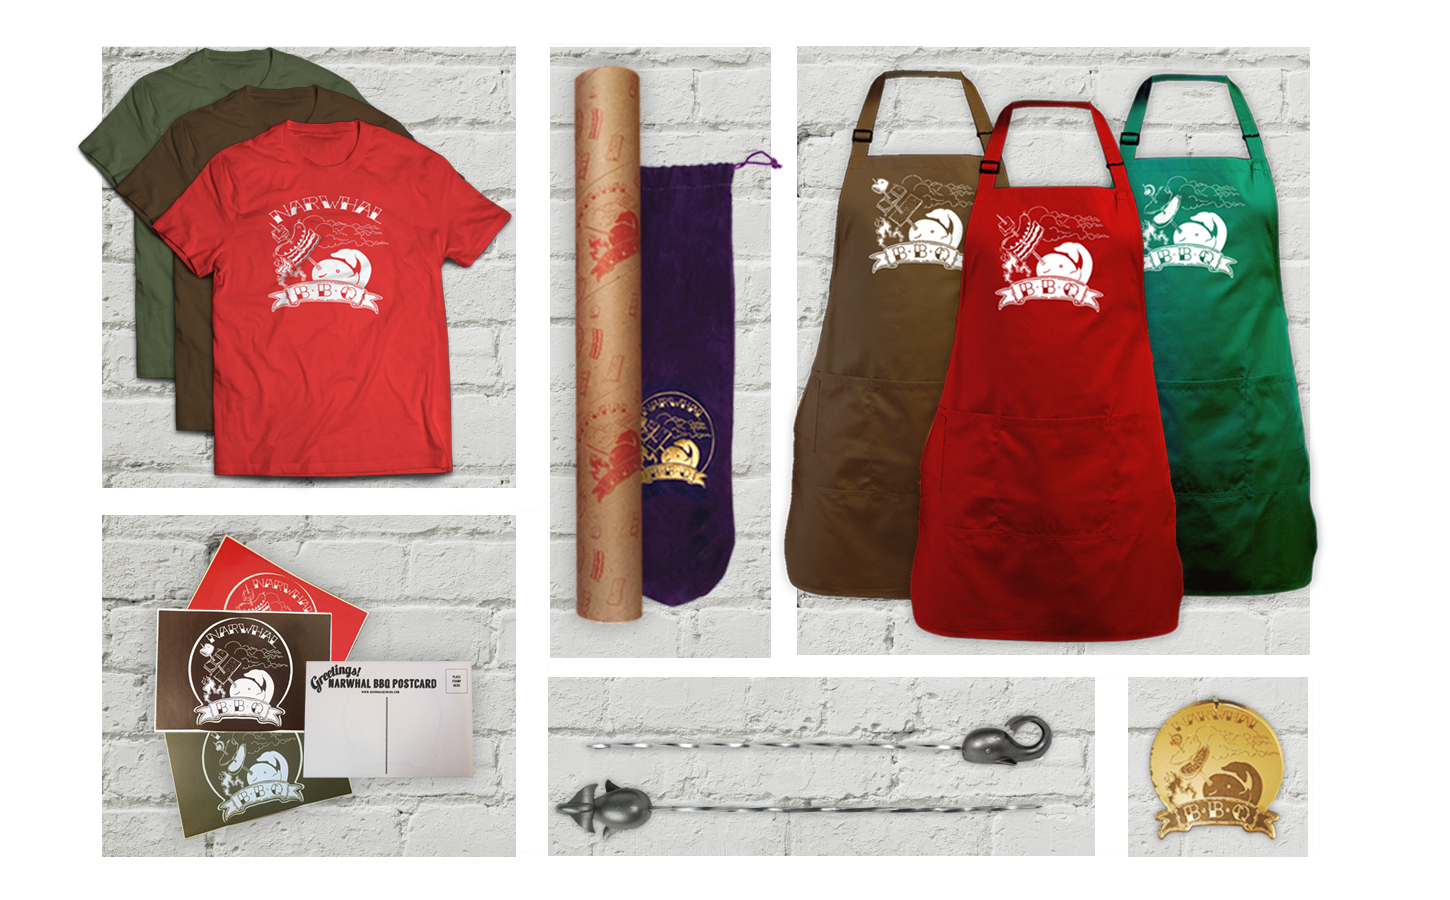 Layout of various narwhal skewer-themed objects. A tshirt, an apron, postcards, and skewers.